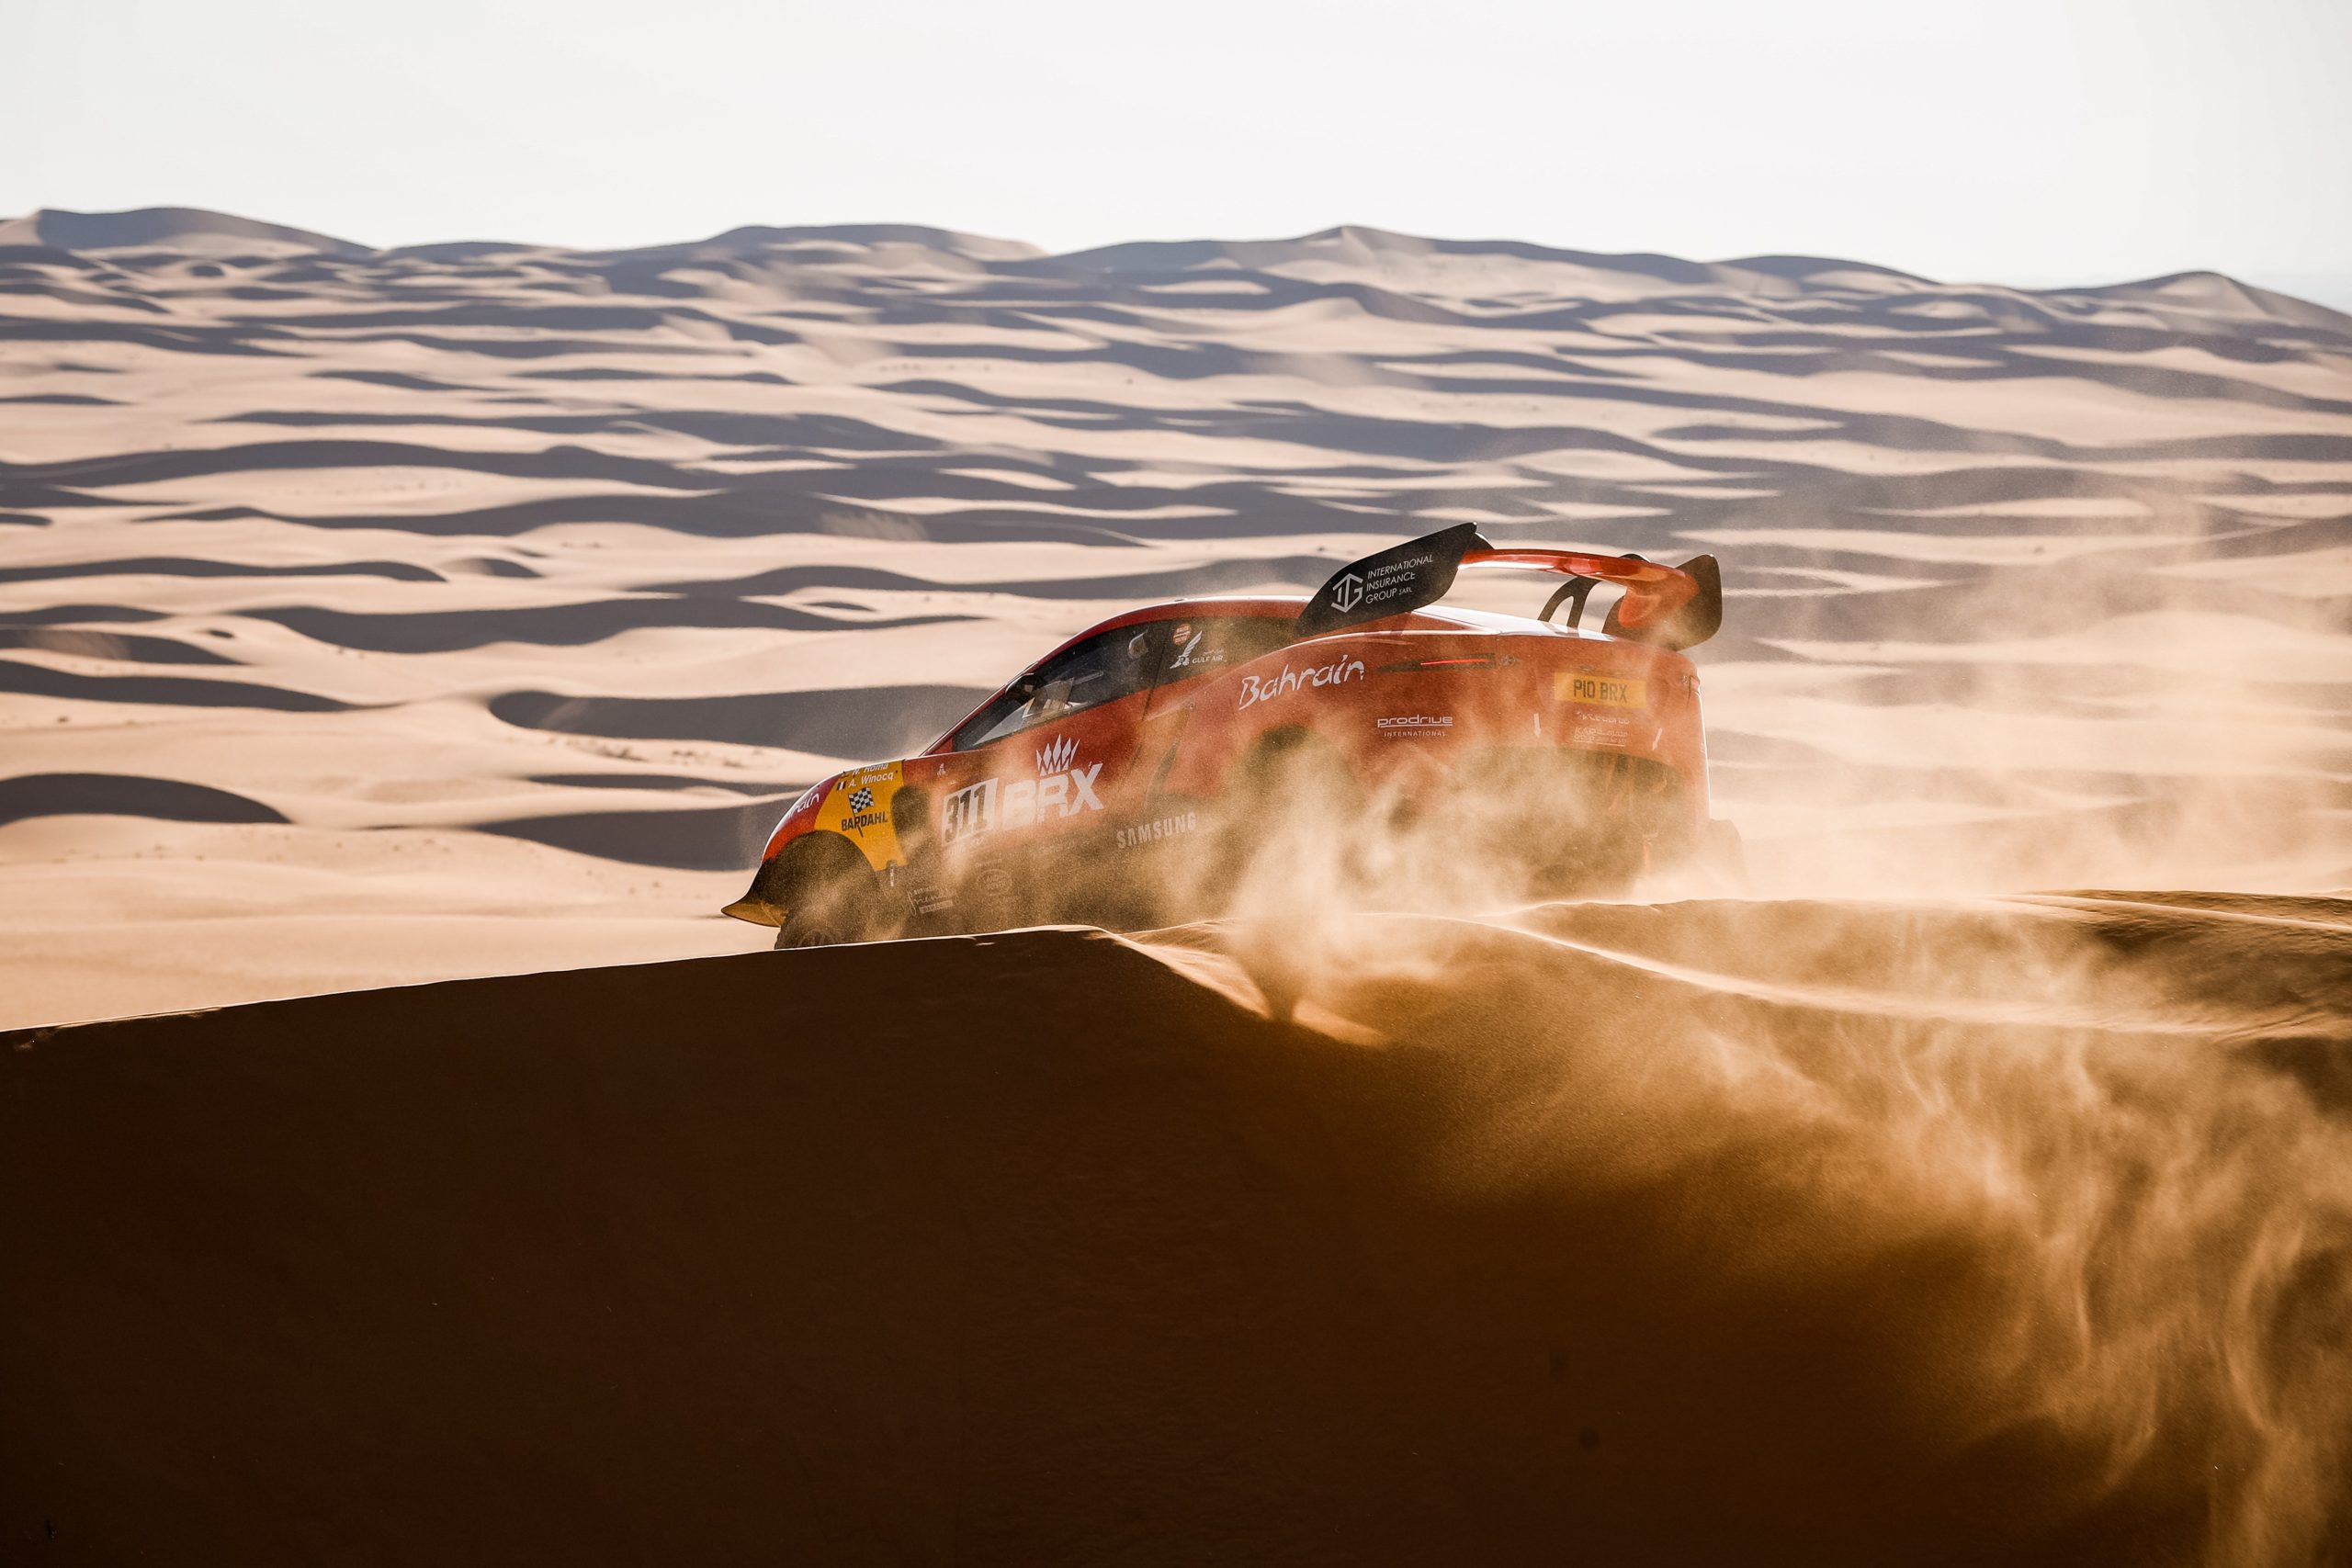 The desert environment of the 12 day long Dakar Rally is extremely demanding on every component of the vehicles that race in it with extreme temperatures and brutal terrain.